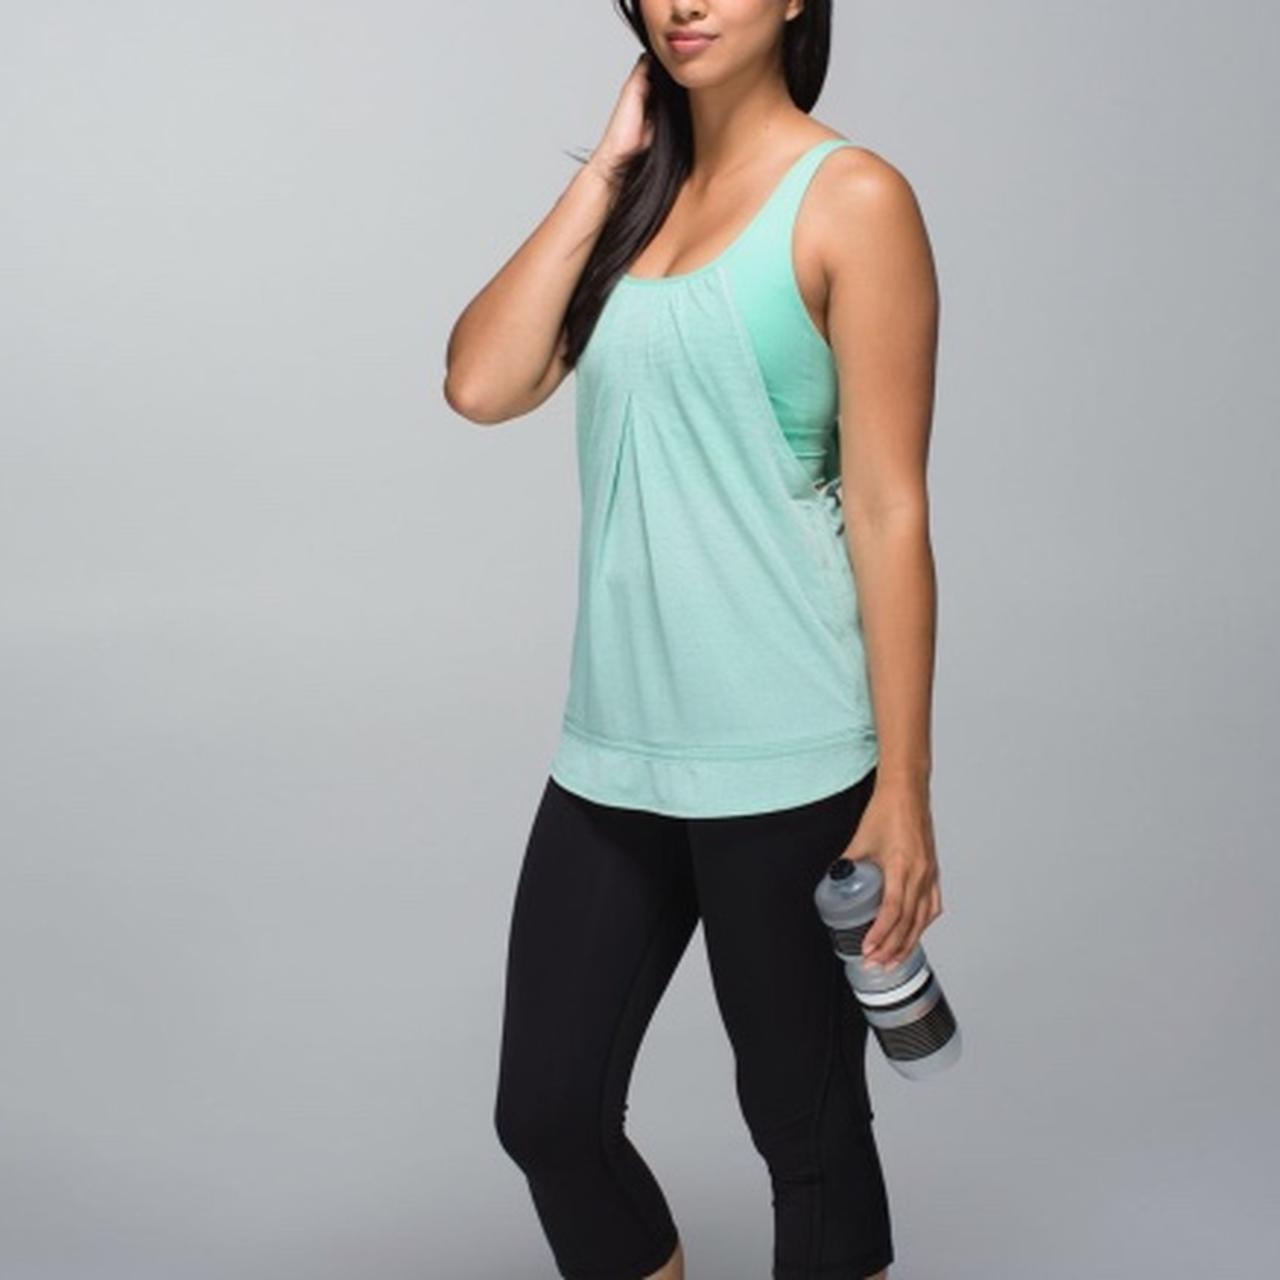 Buy the Lululemon women's loose fit tank with built in bra